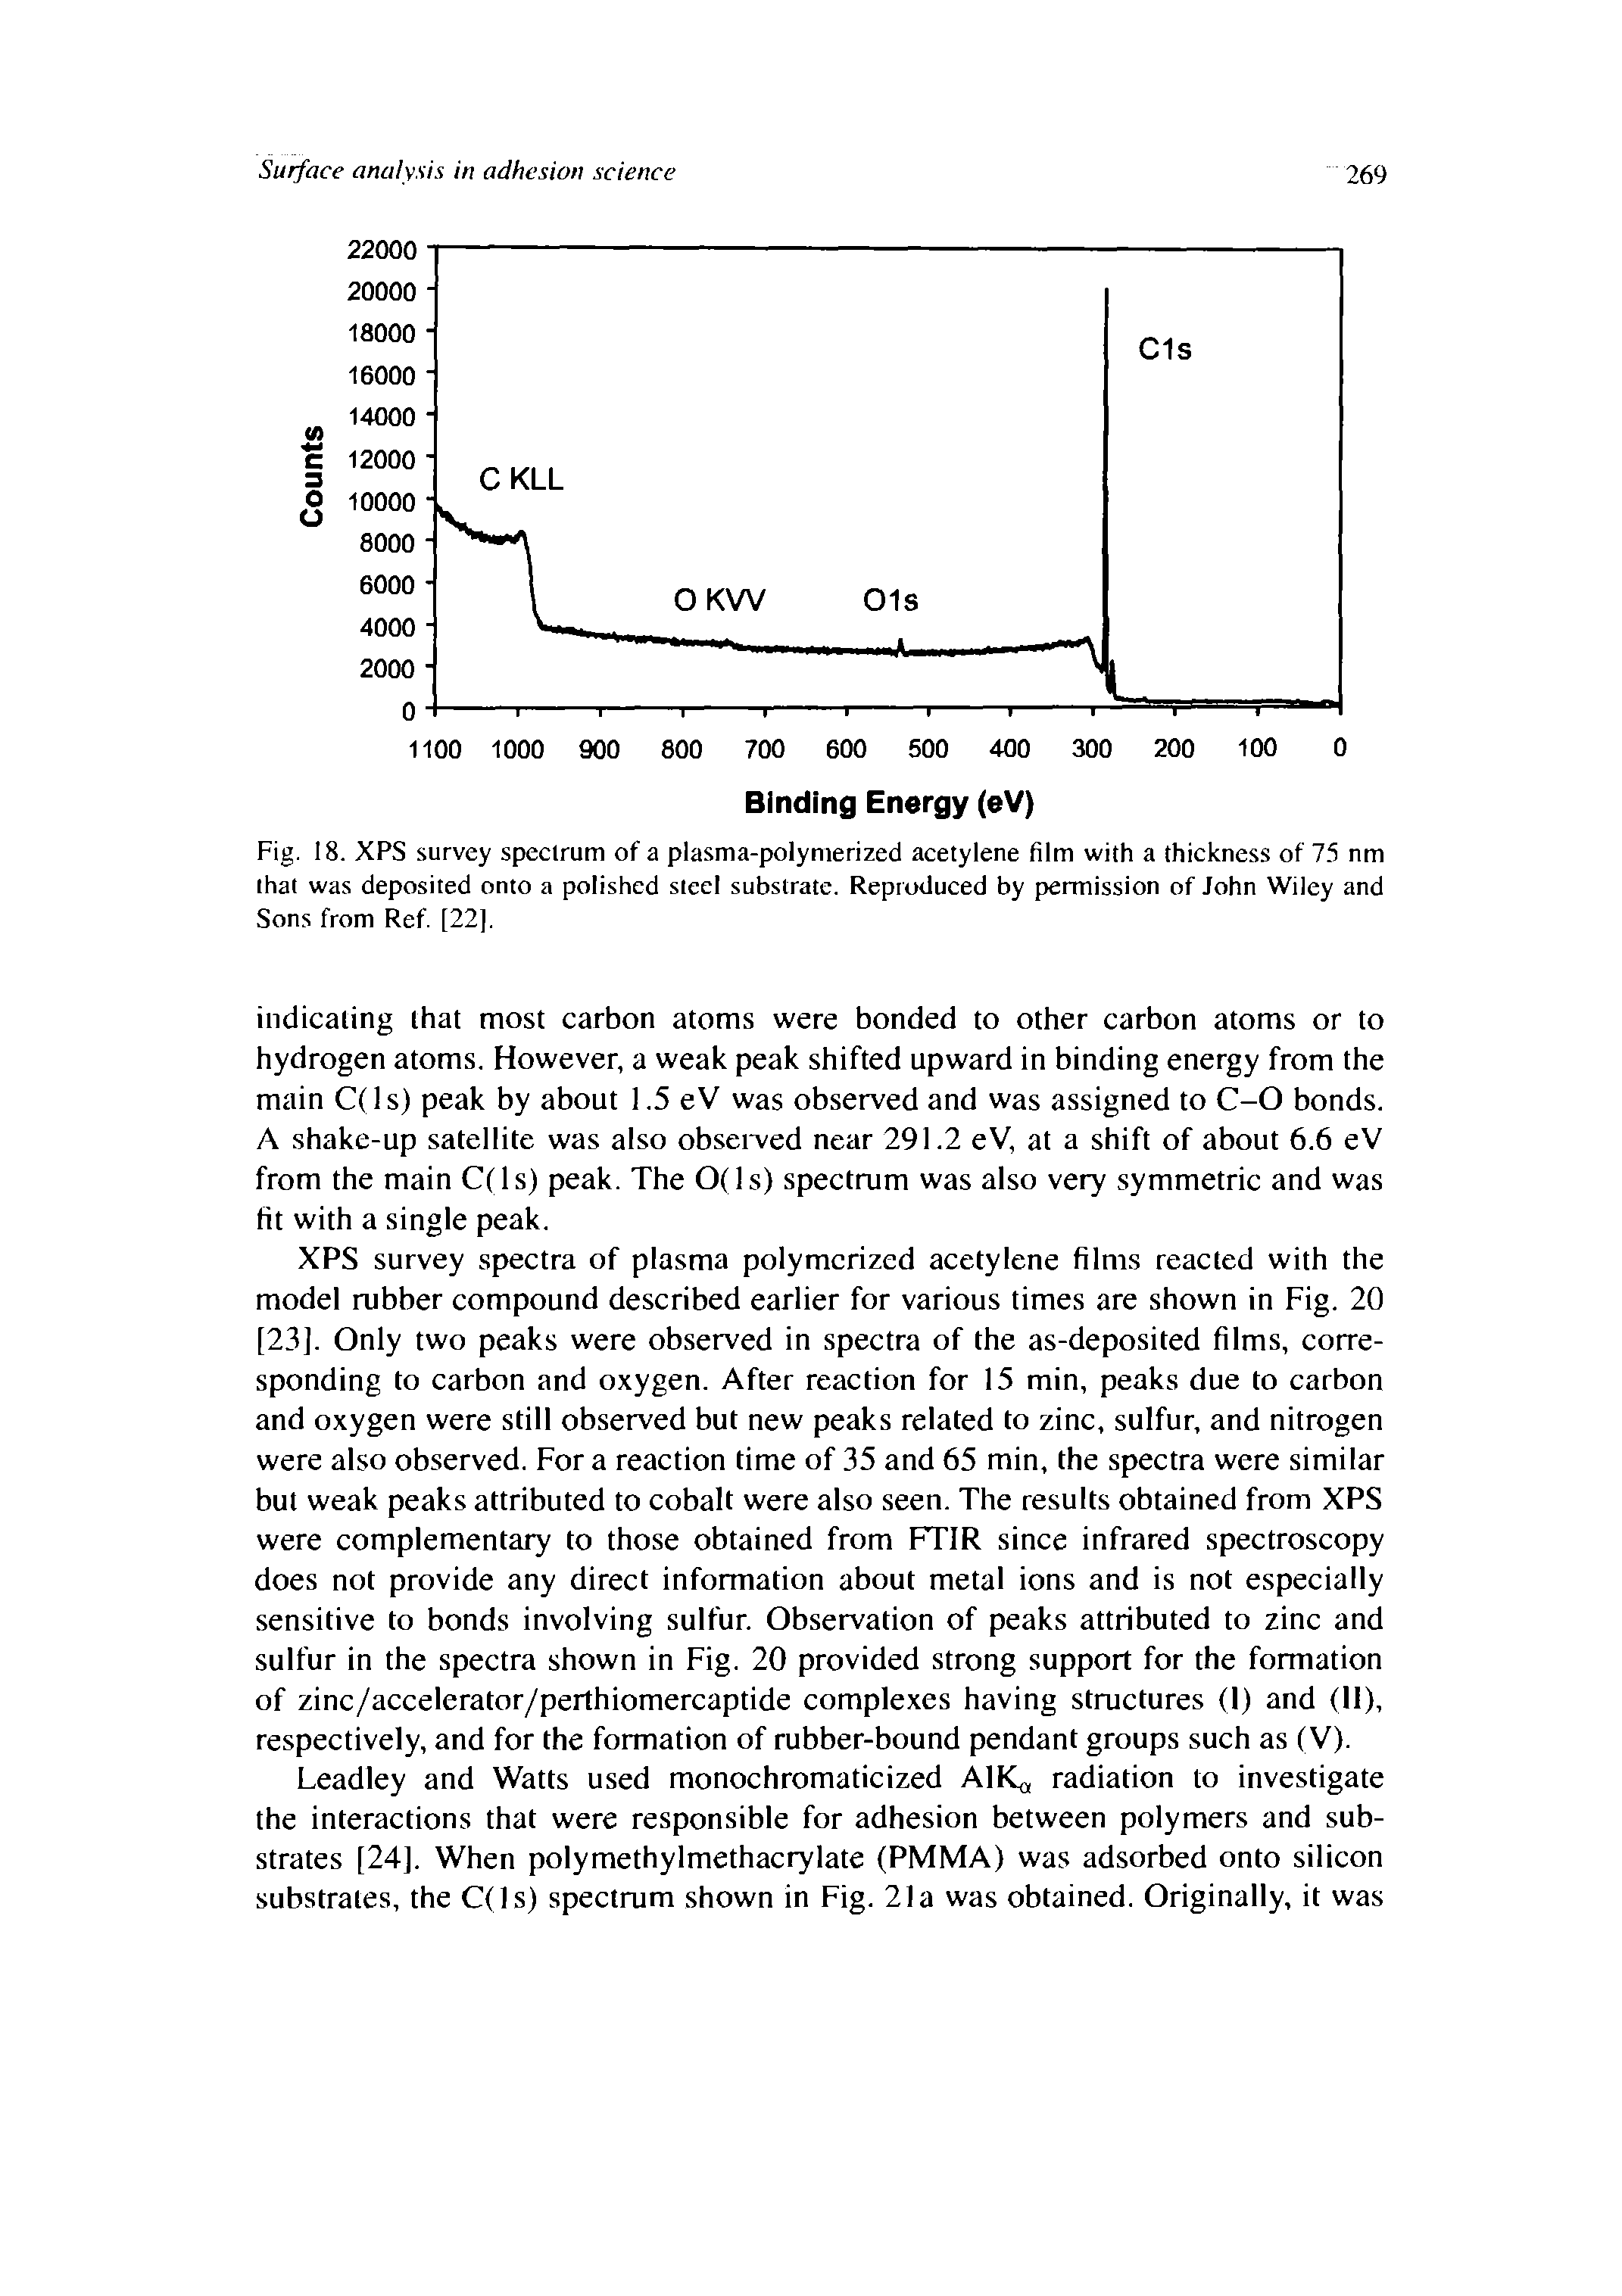 Fig. 18. XPS survey spectrum of a plasma-polymerized acetylene film with a thickness of 75 nm that was deposited onto a polished steel substrate. Reproduced by ptermission of John Wiley and Sons from Ref. [22].